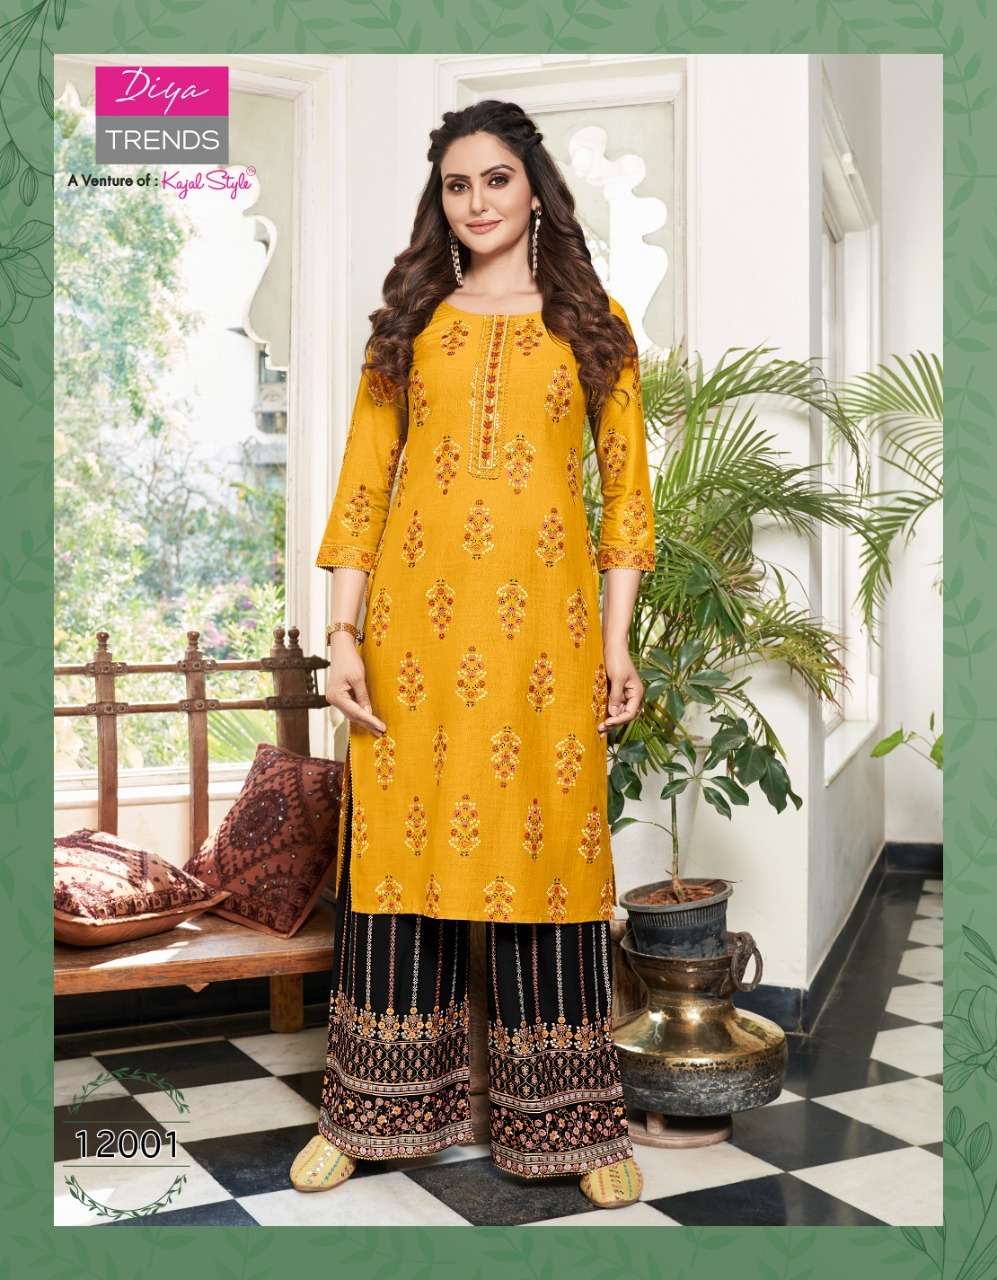 25 Latest Collection of Biba Kurtis For Women - Stylish Models |  Contemporary clothes, Biba fashion, Blouse design images